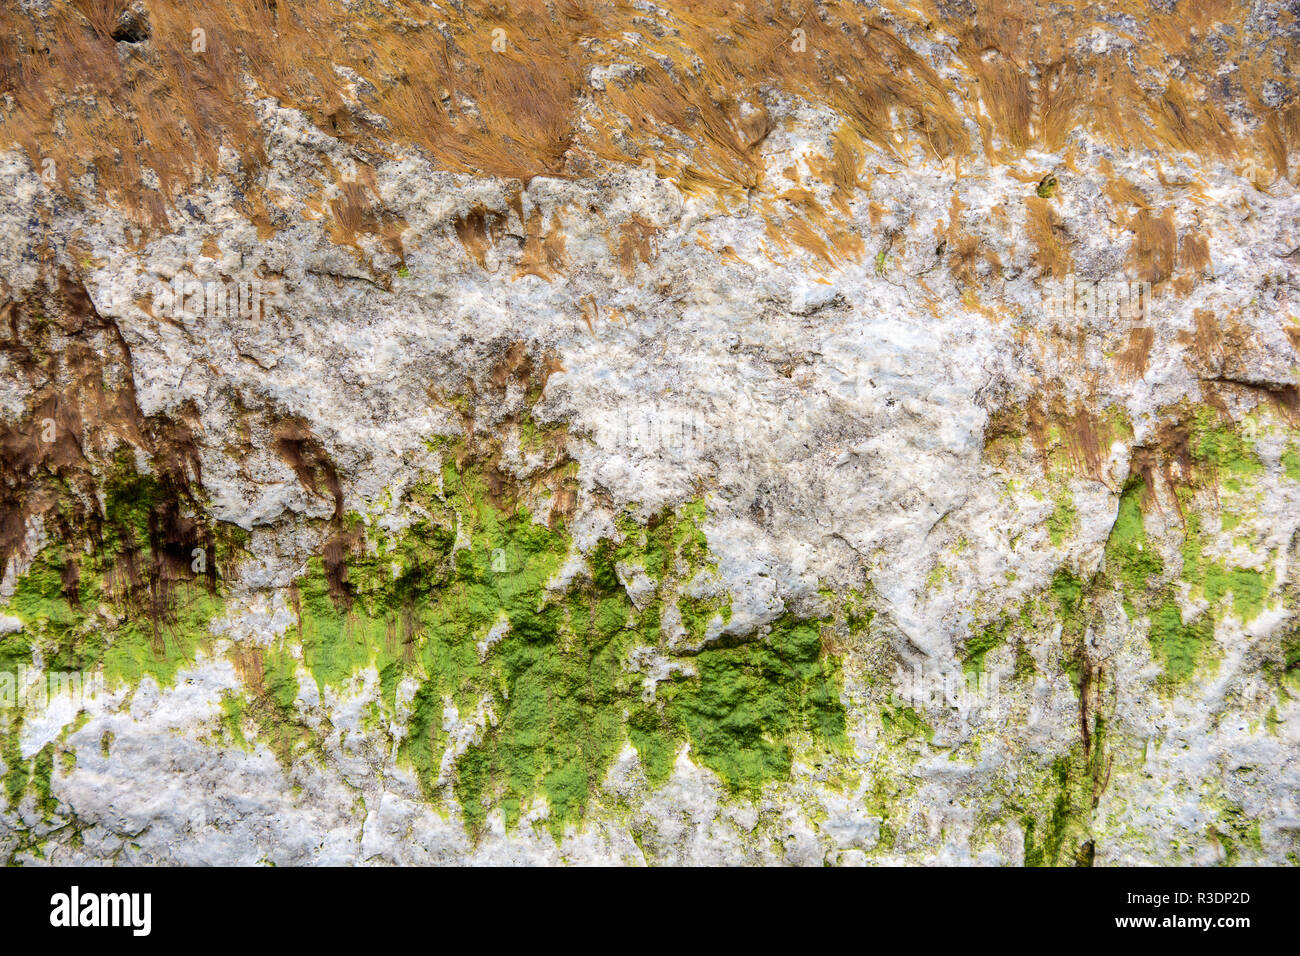 close up of green seaweed on rough rock surface Stock Photo